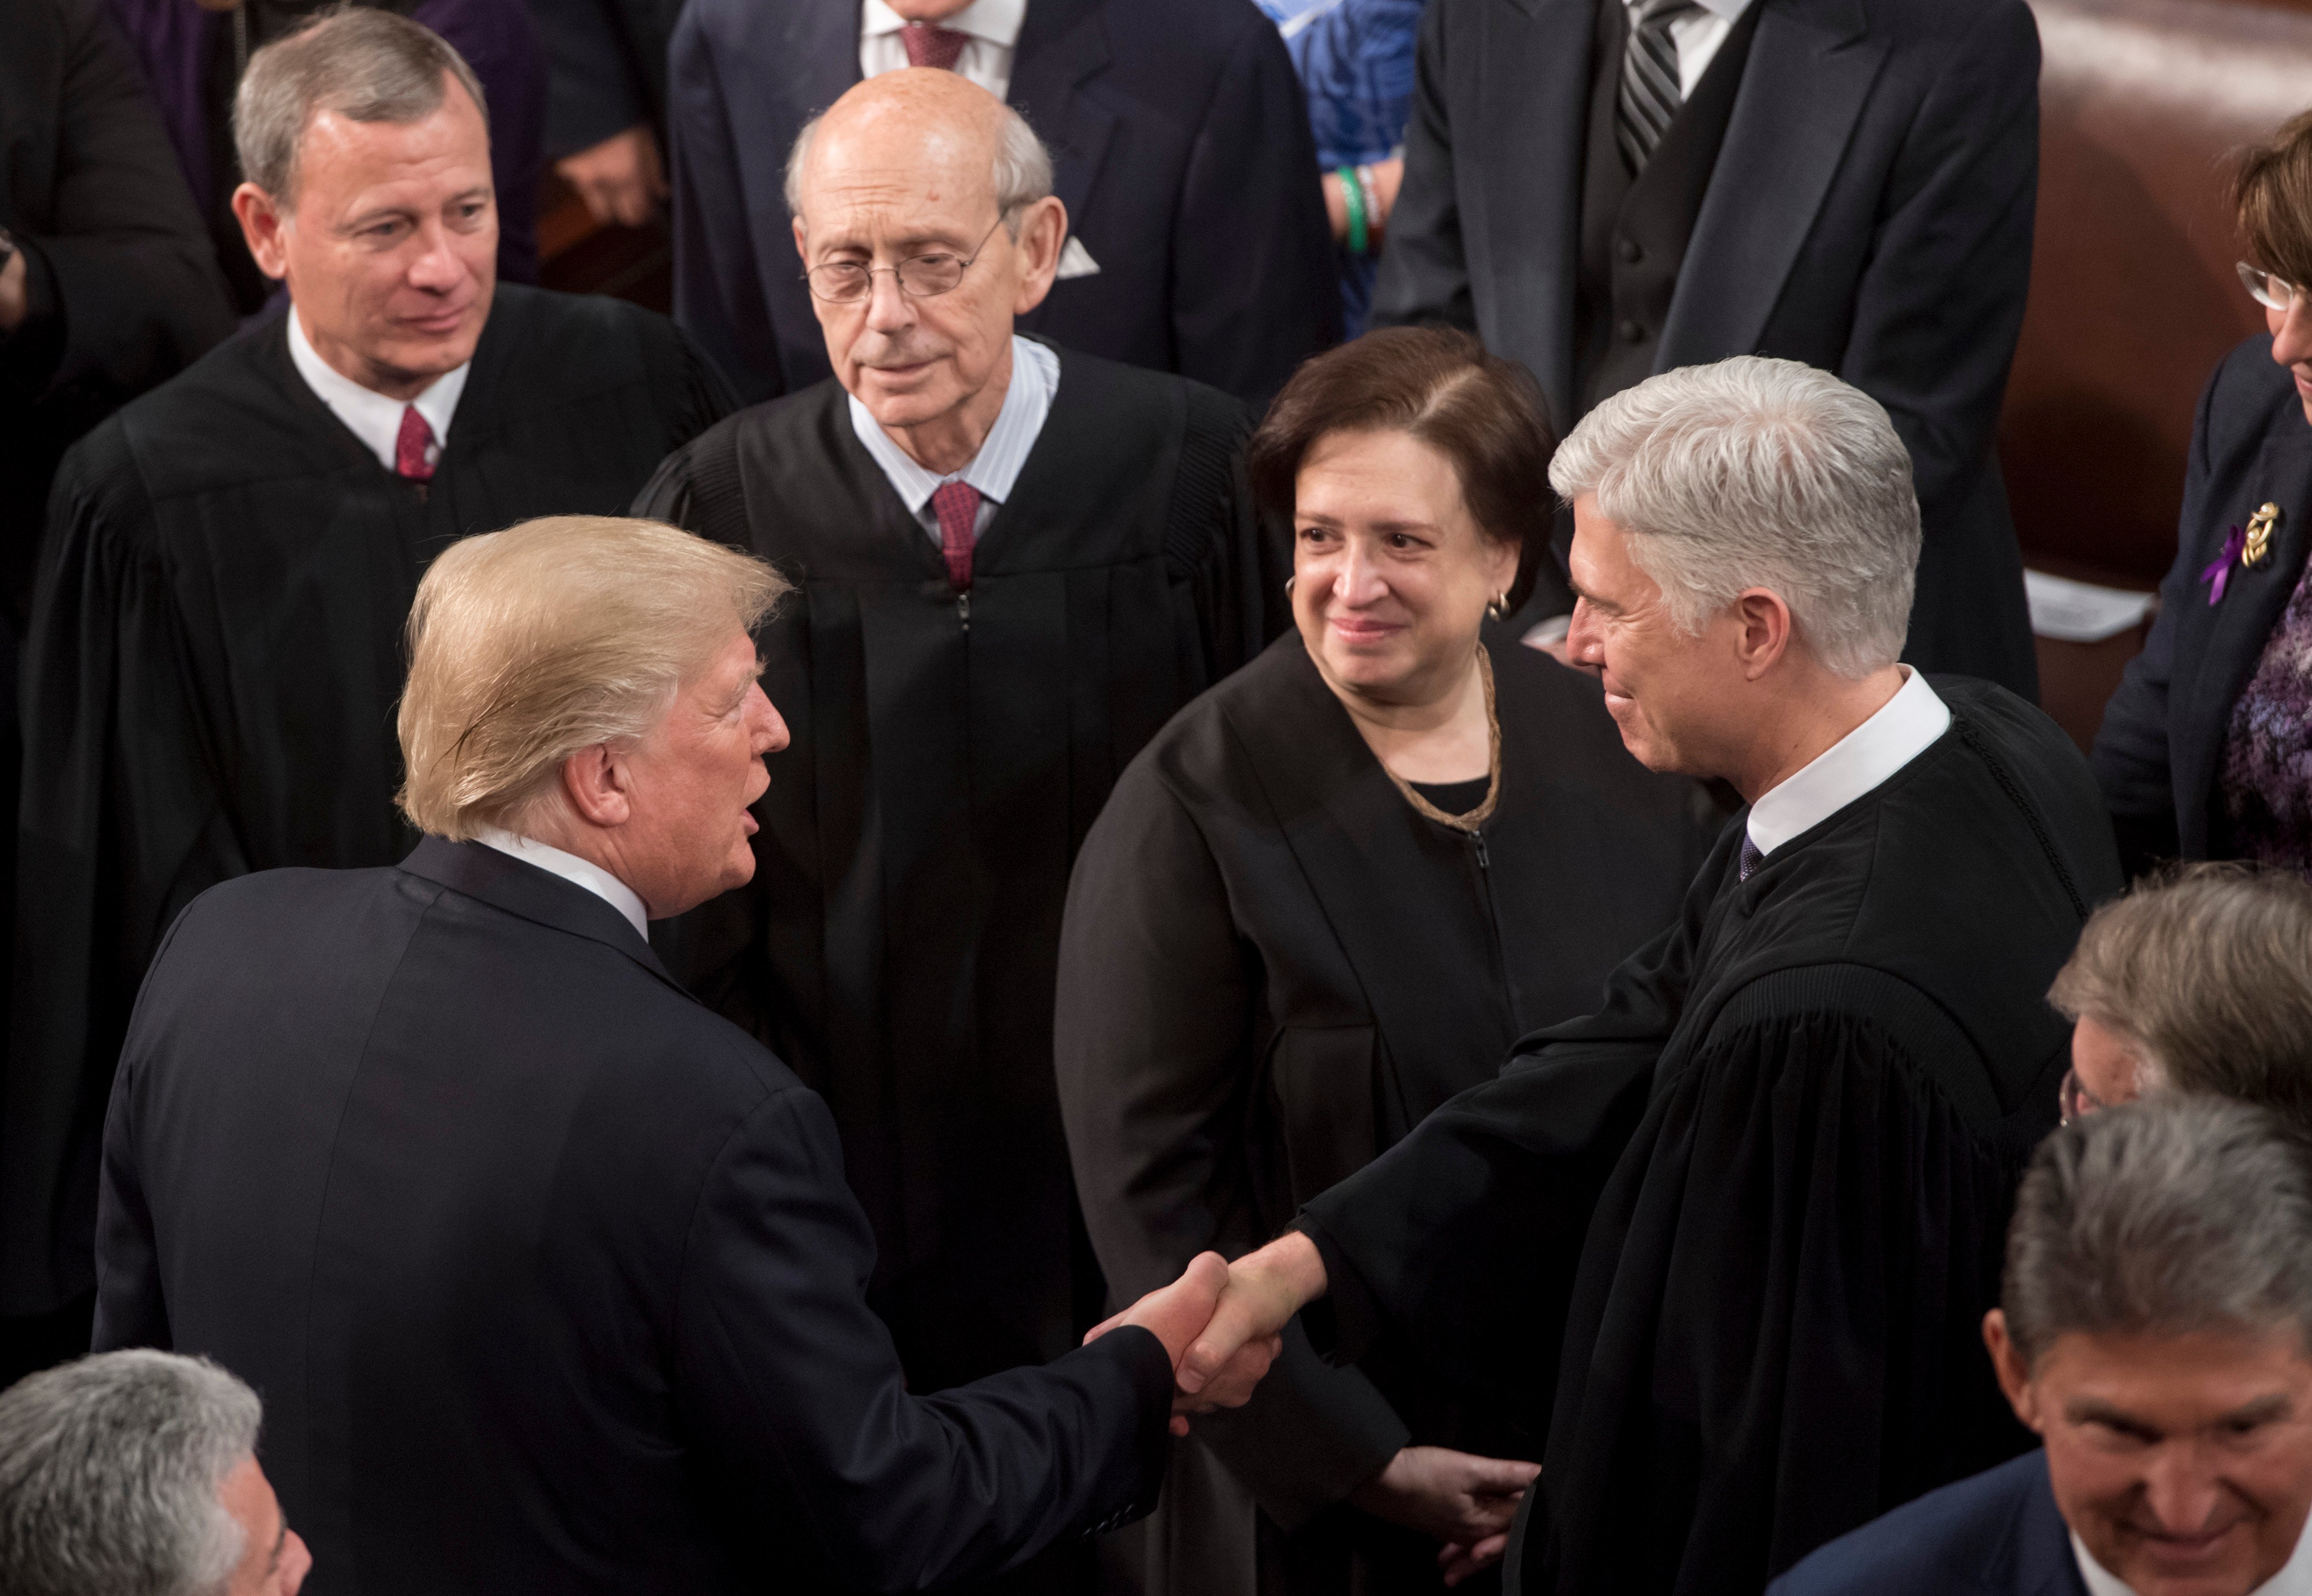 President Donald Trump shakes hands with Justice Neil Gorsuch as other members of the Supreme Court look on during the State of the Union address on January 30, 2018. (Saul Loeb/AFP/Getty Images)